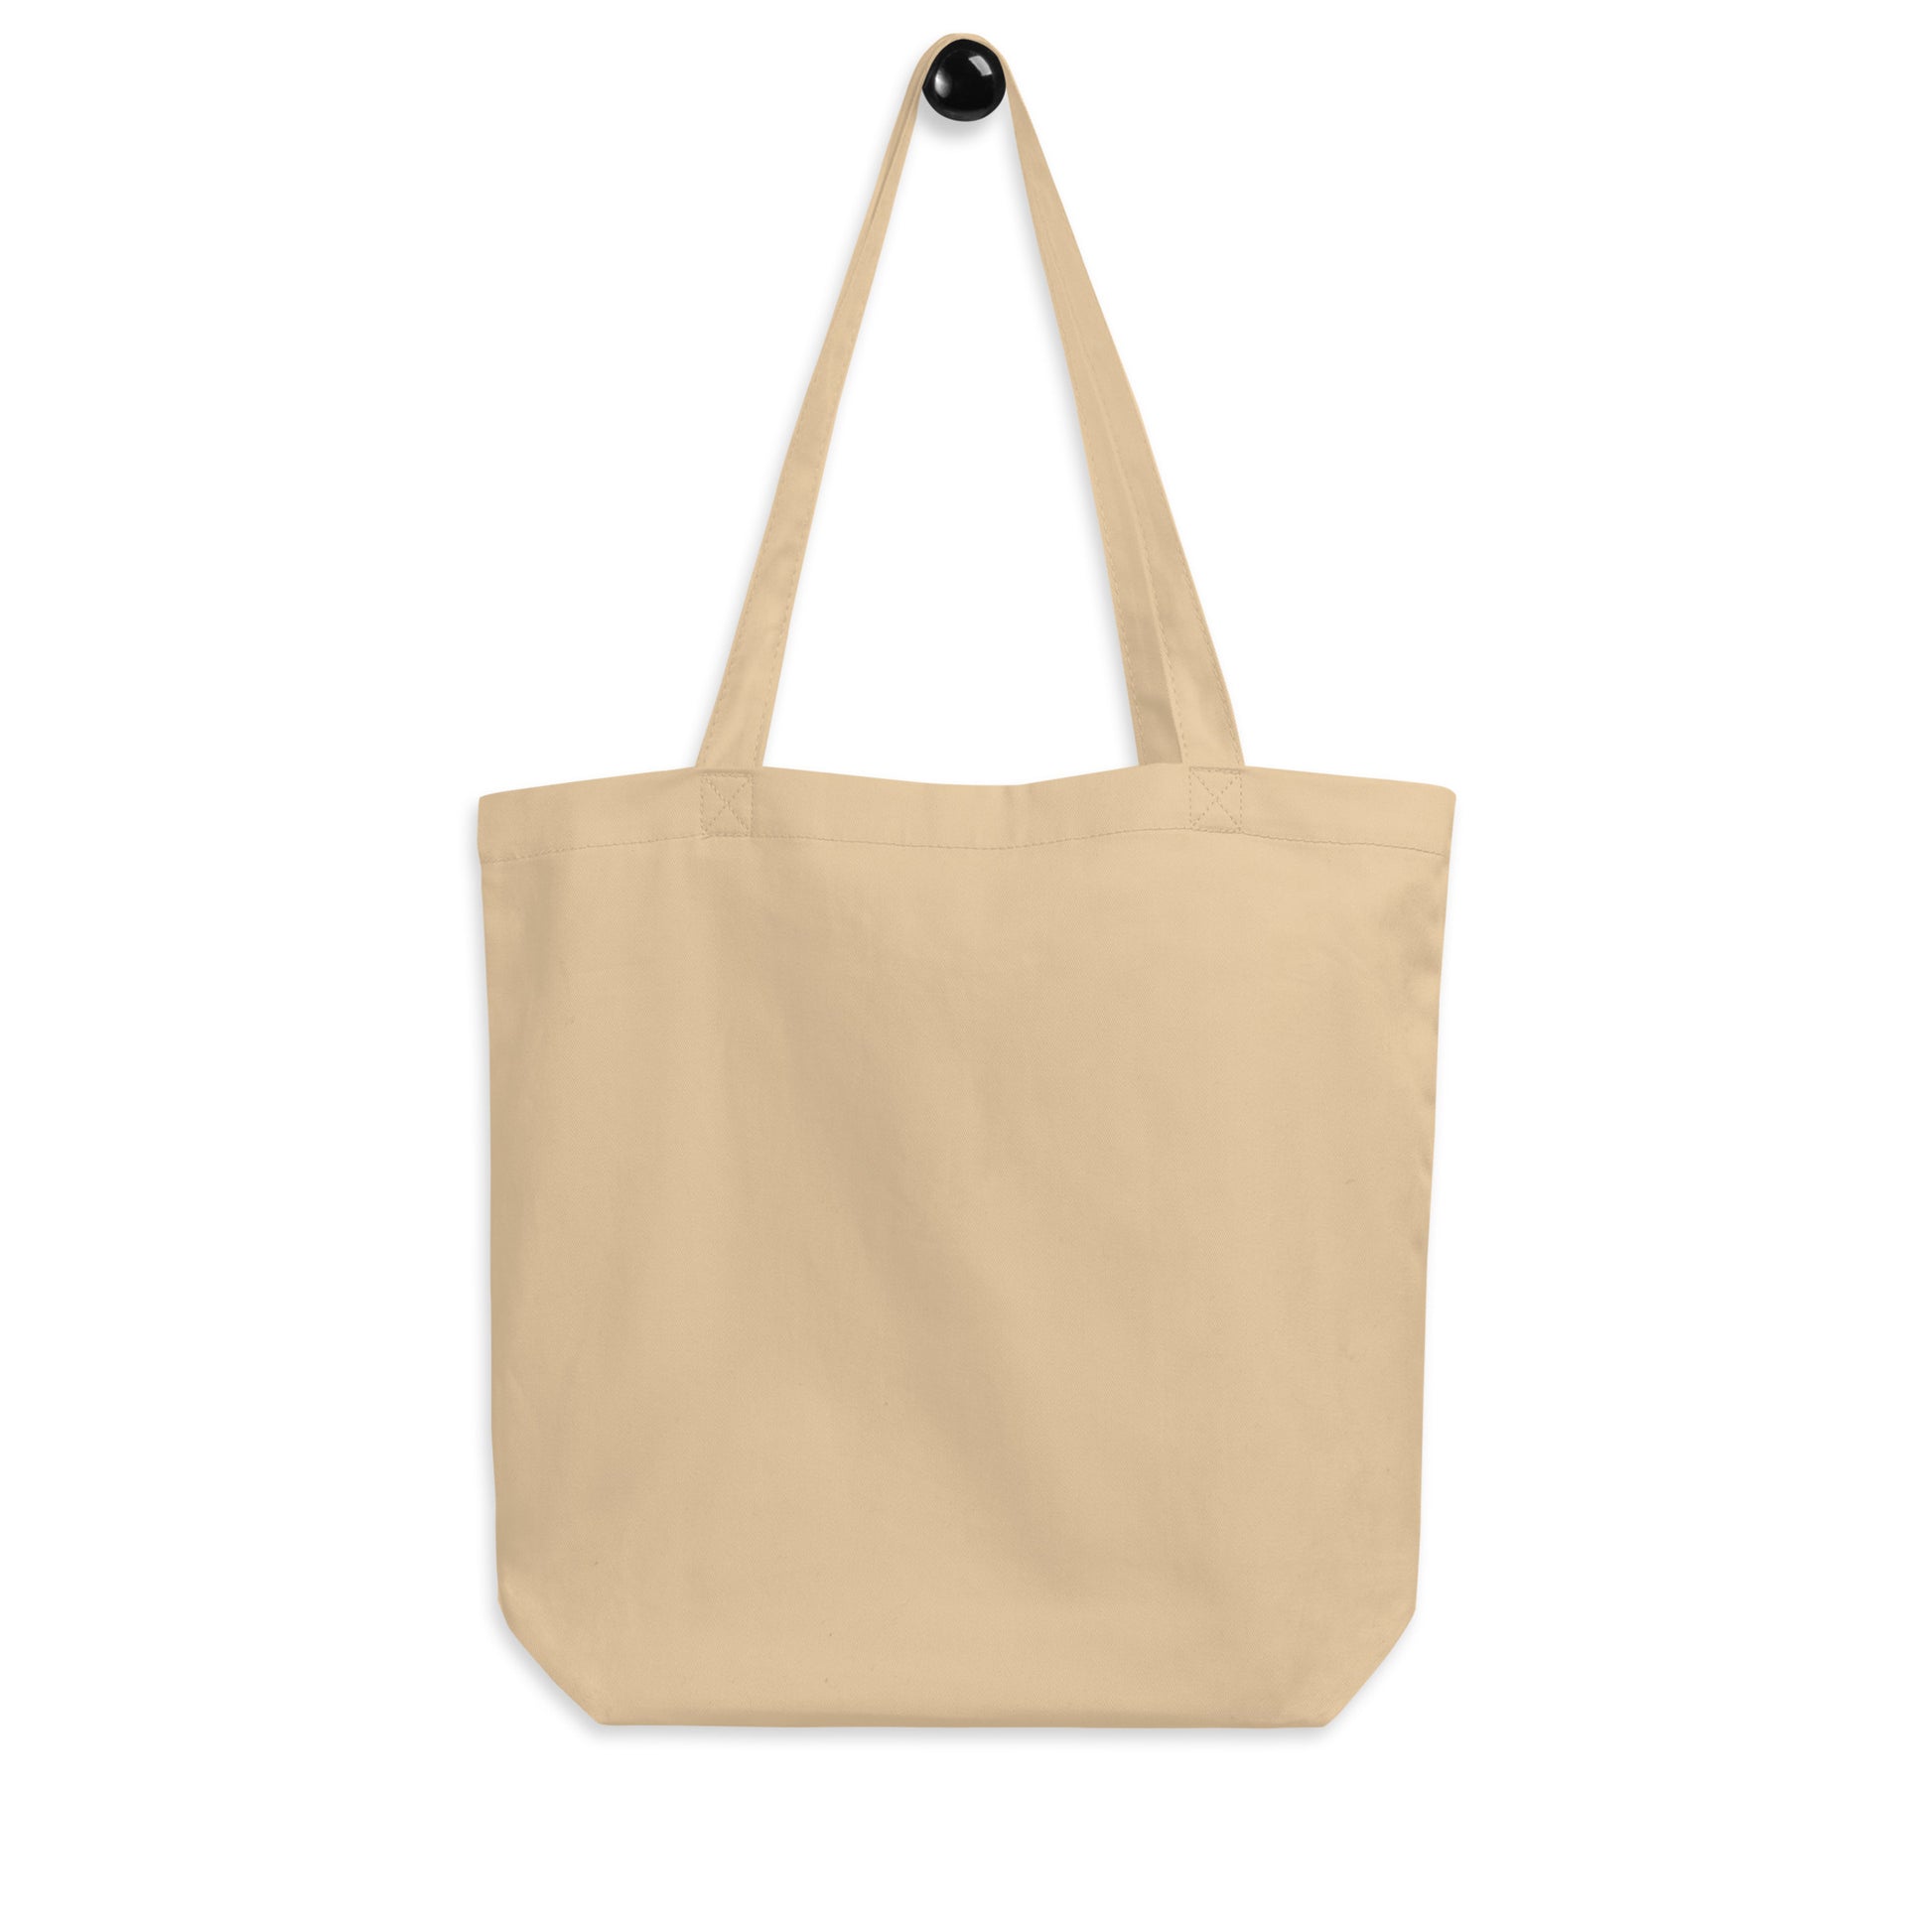 Aviation Gift Organic Tote - Black • CLE Cleveland • YHM Designs - Image 05